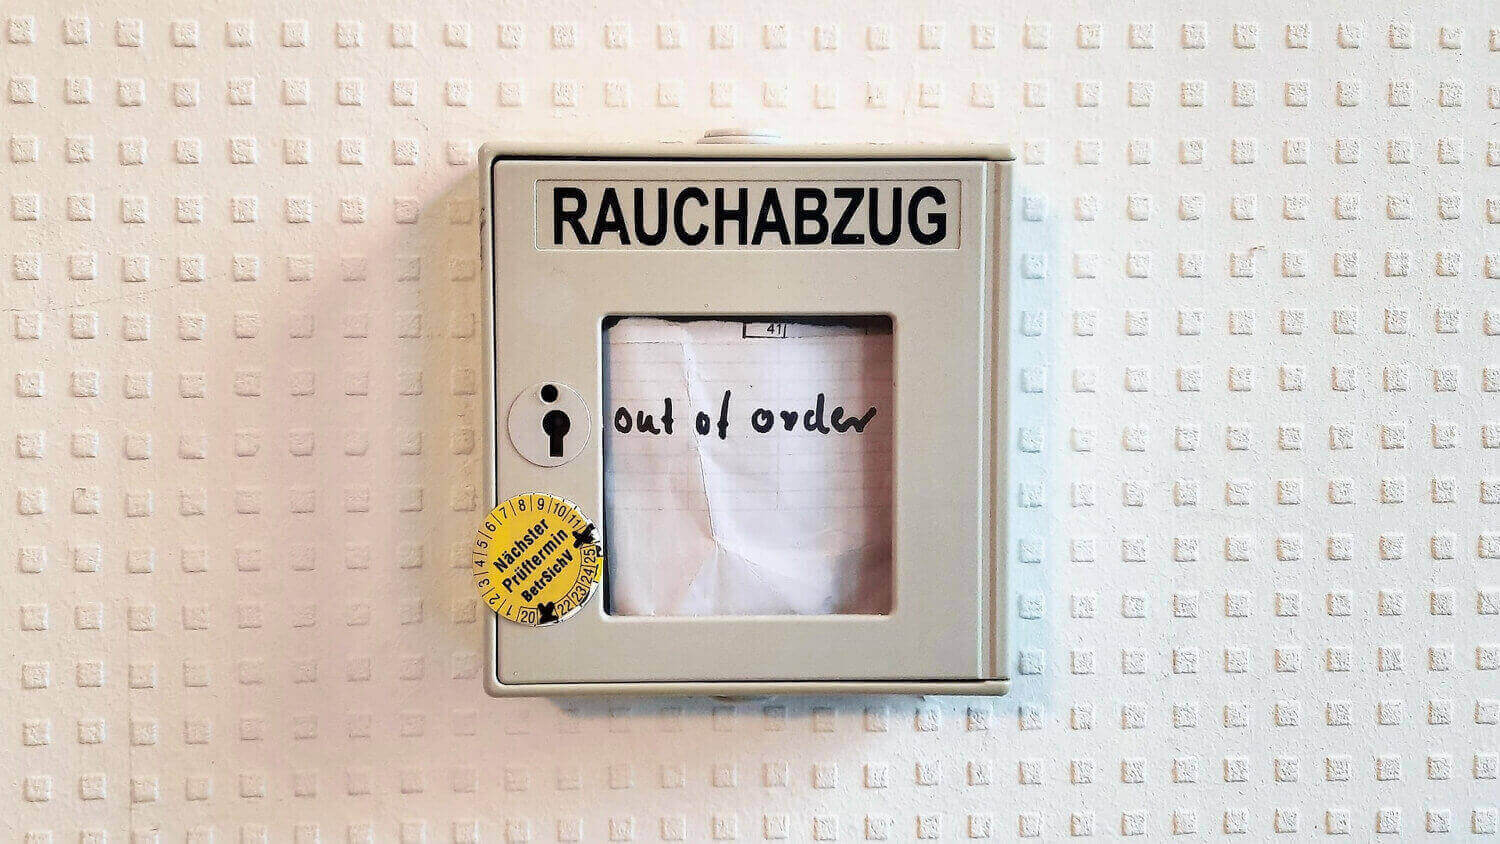 A handwritten "out of order" note in a German smoke outlet control.